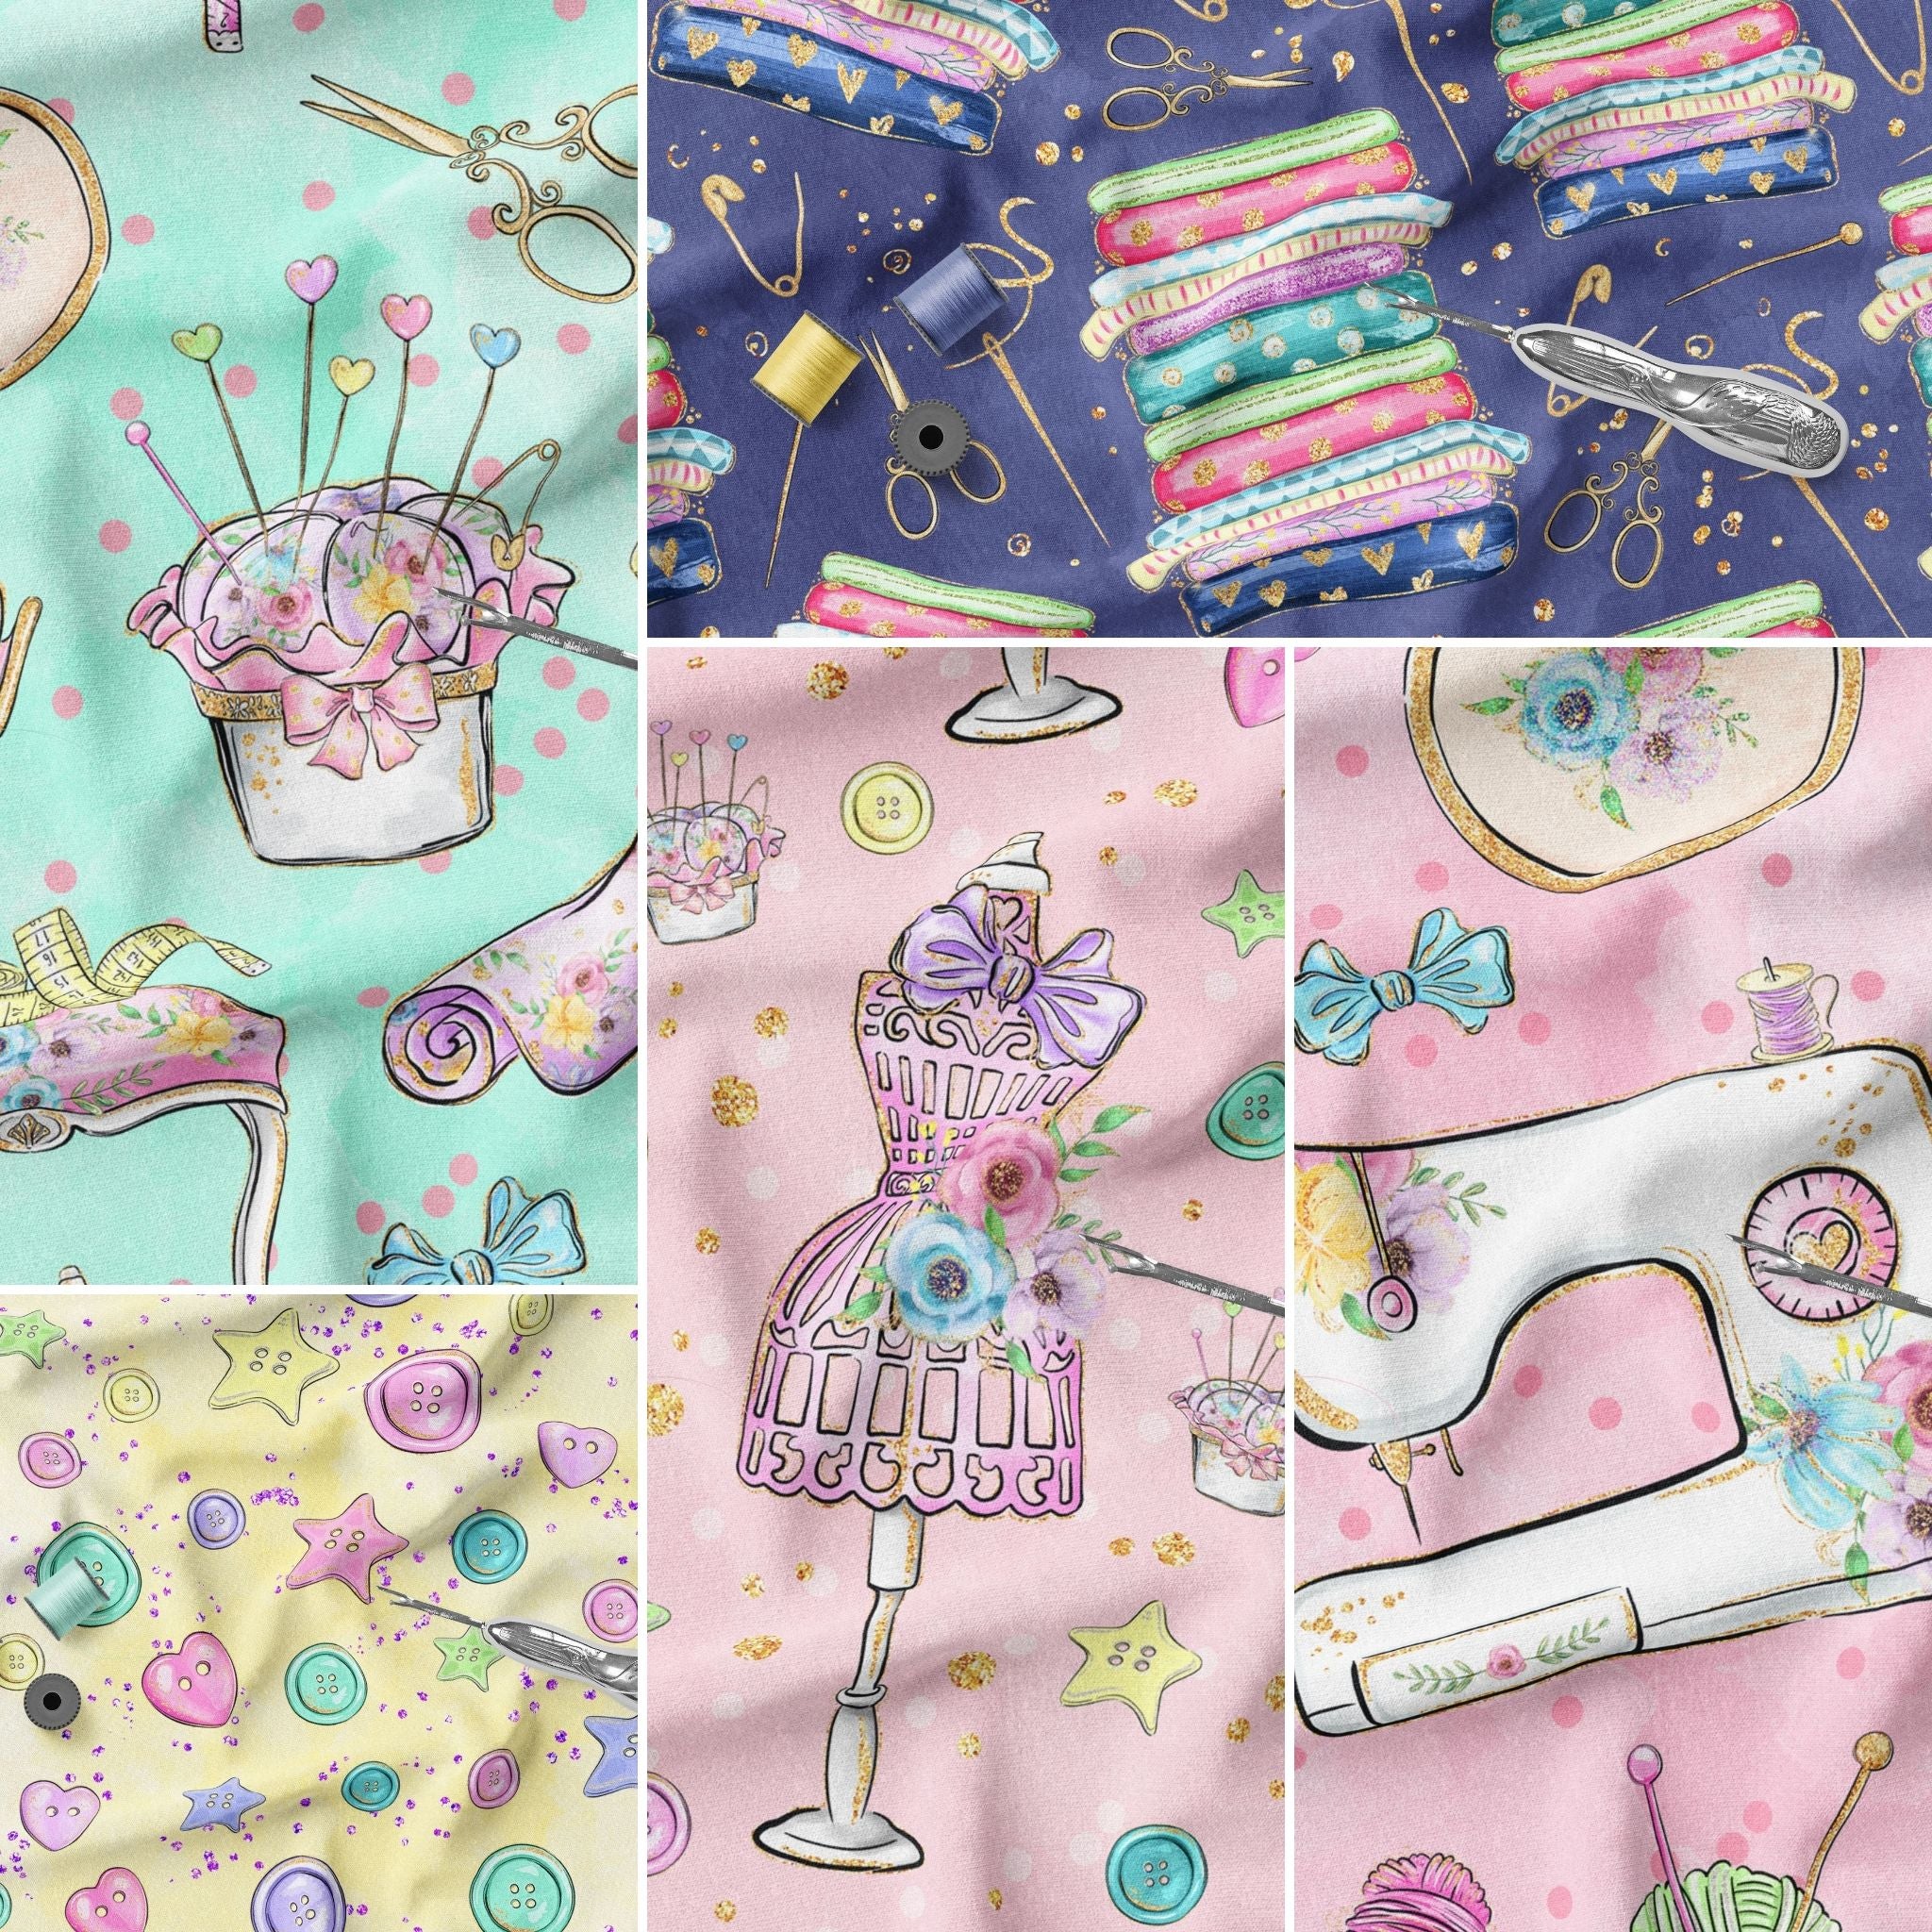 Cotton Fabric - Sewing Fabric - Sew Lovely Sewing Pin Toss Ball Pins Sewing  Notions Cream - 4my3boyz Fabric